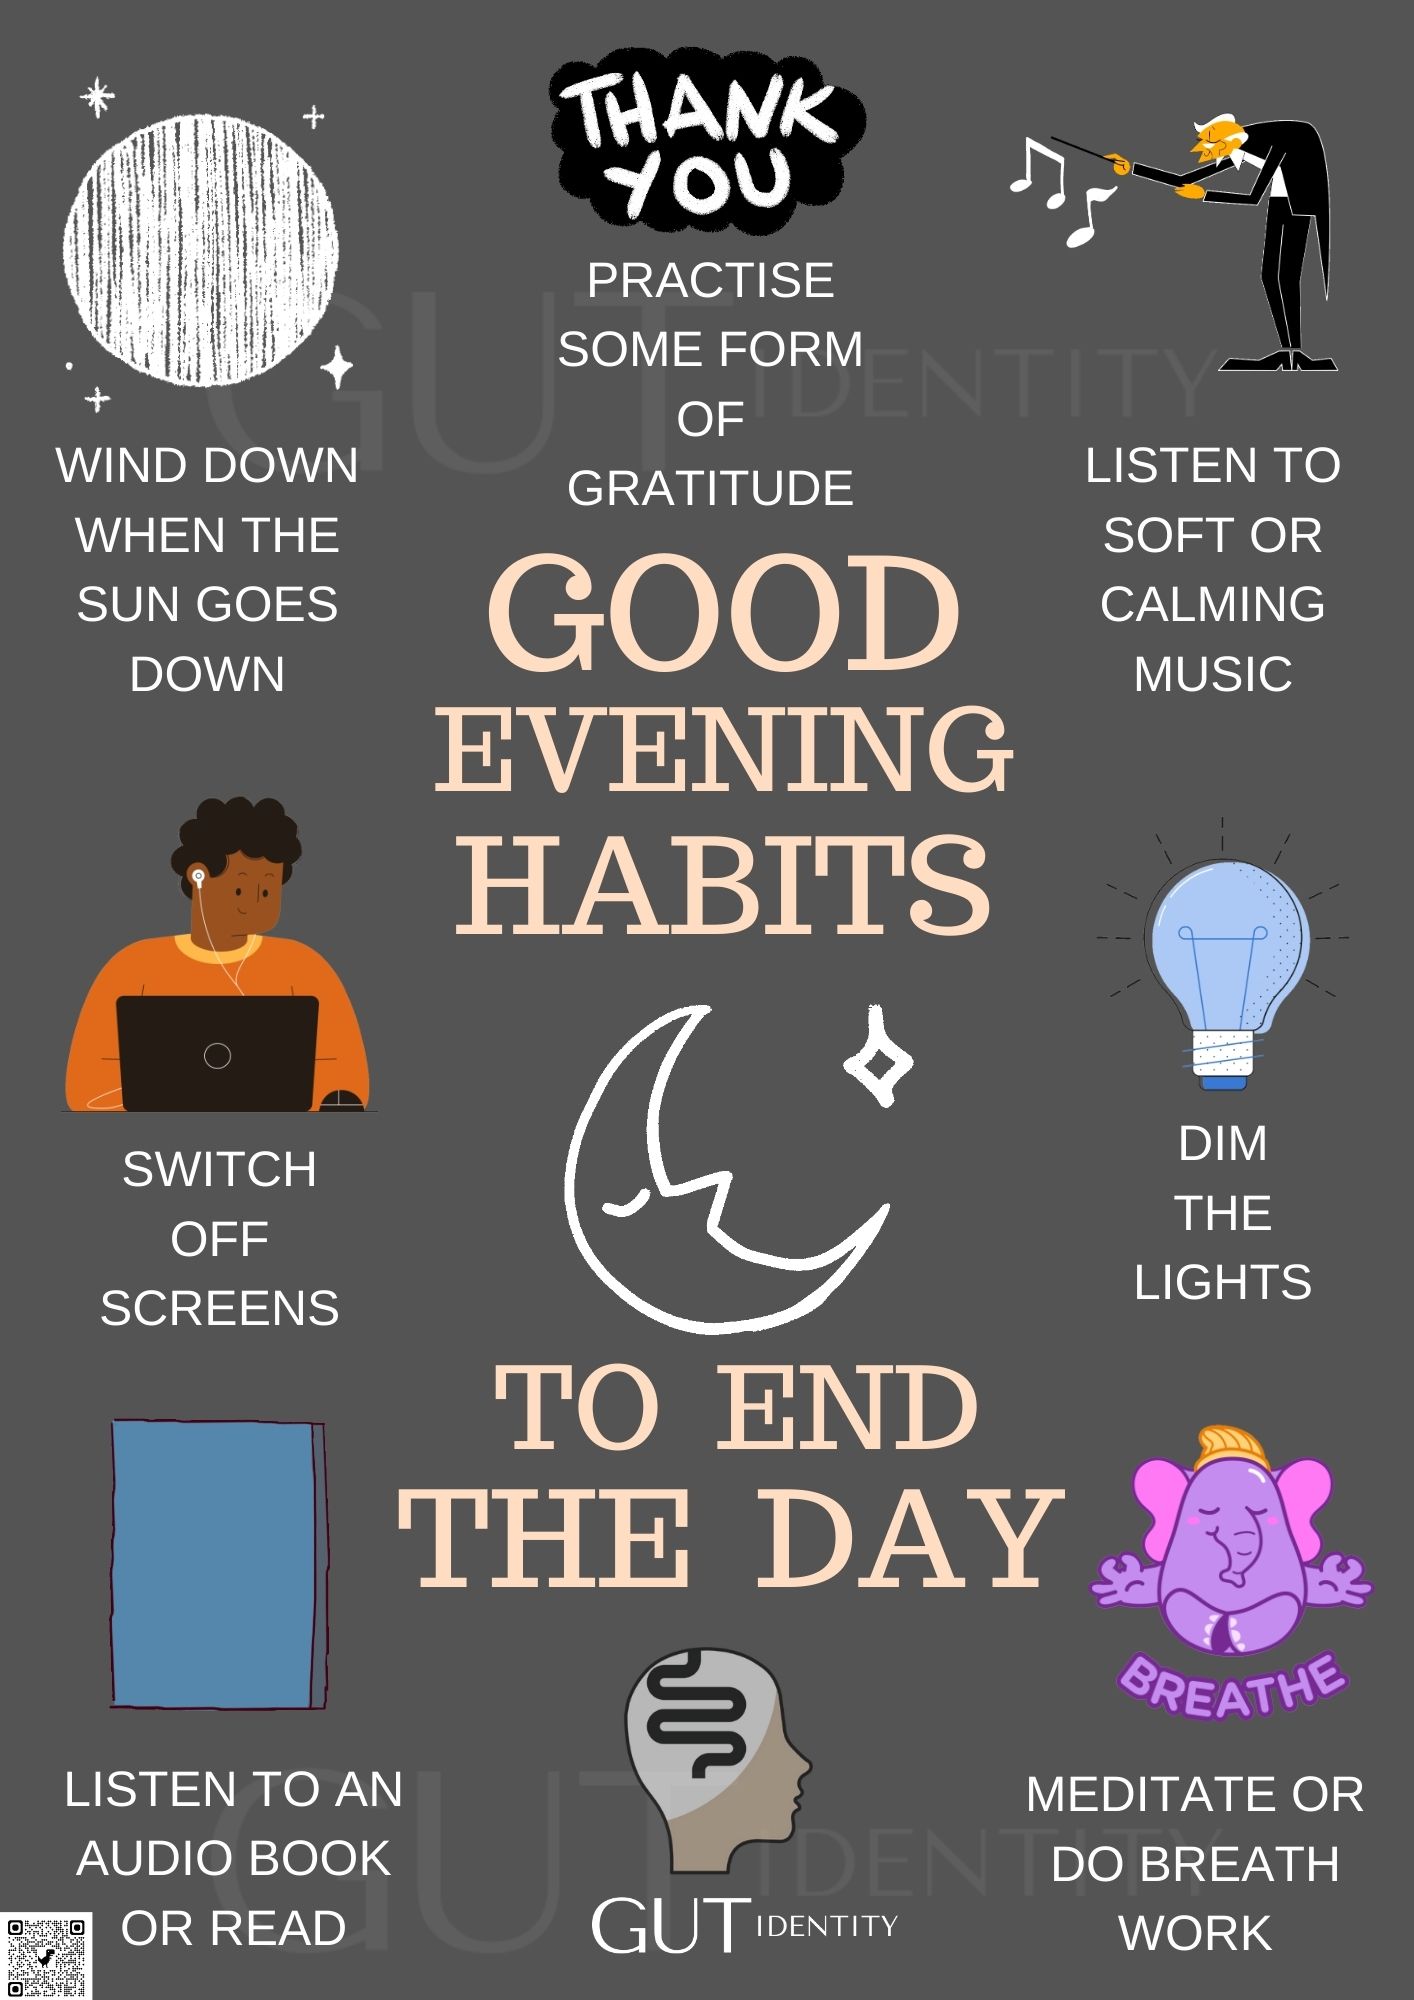 Good evening habits to end the day by Gutidentity